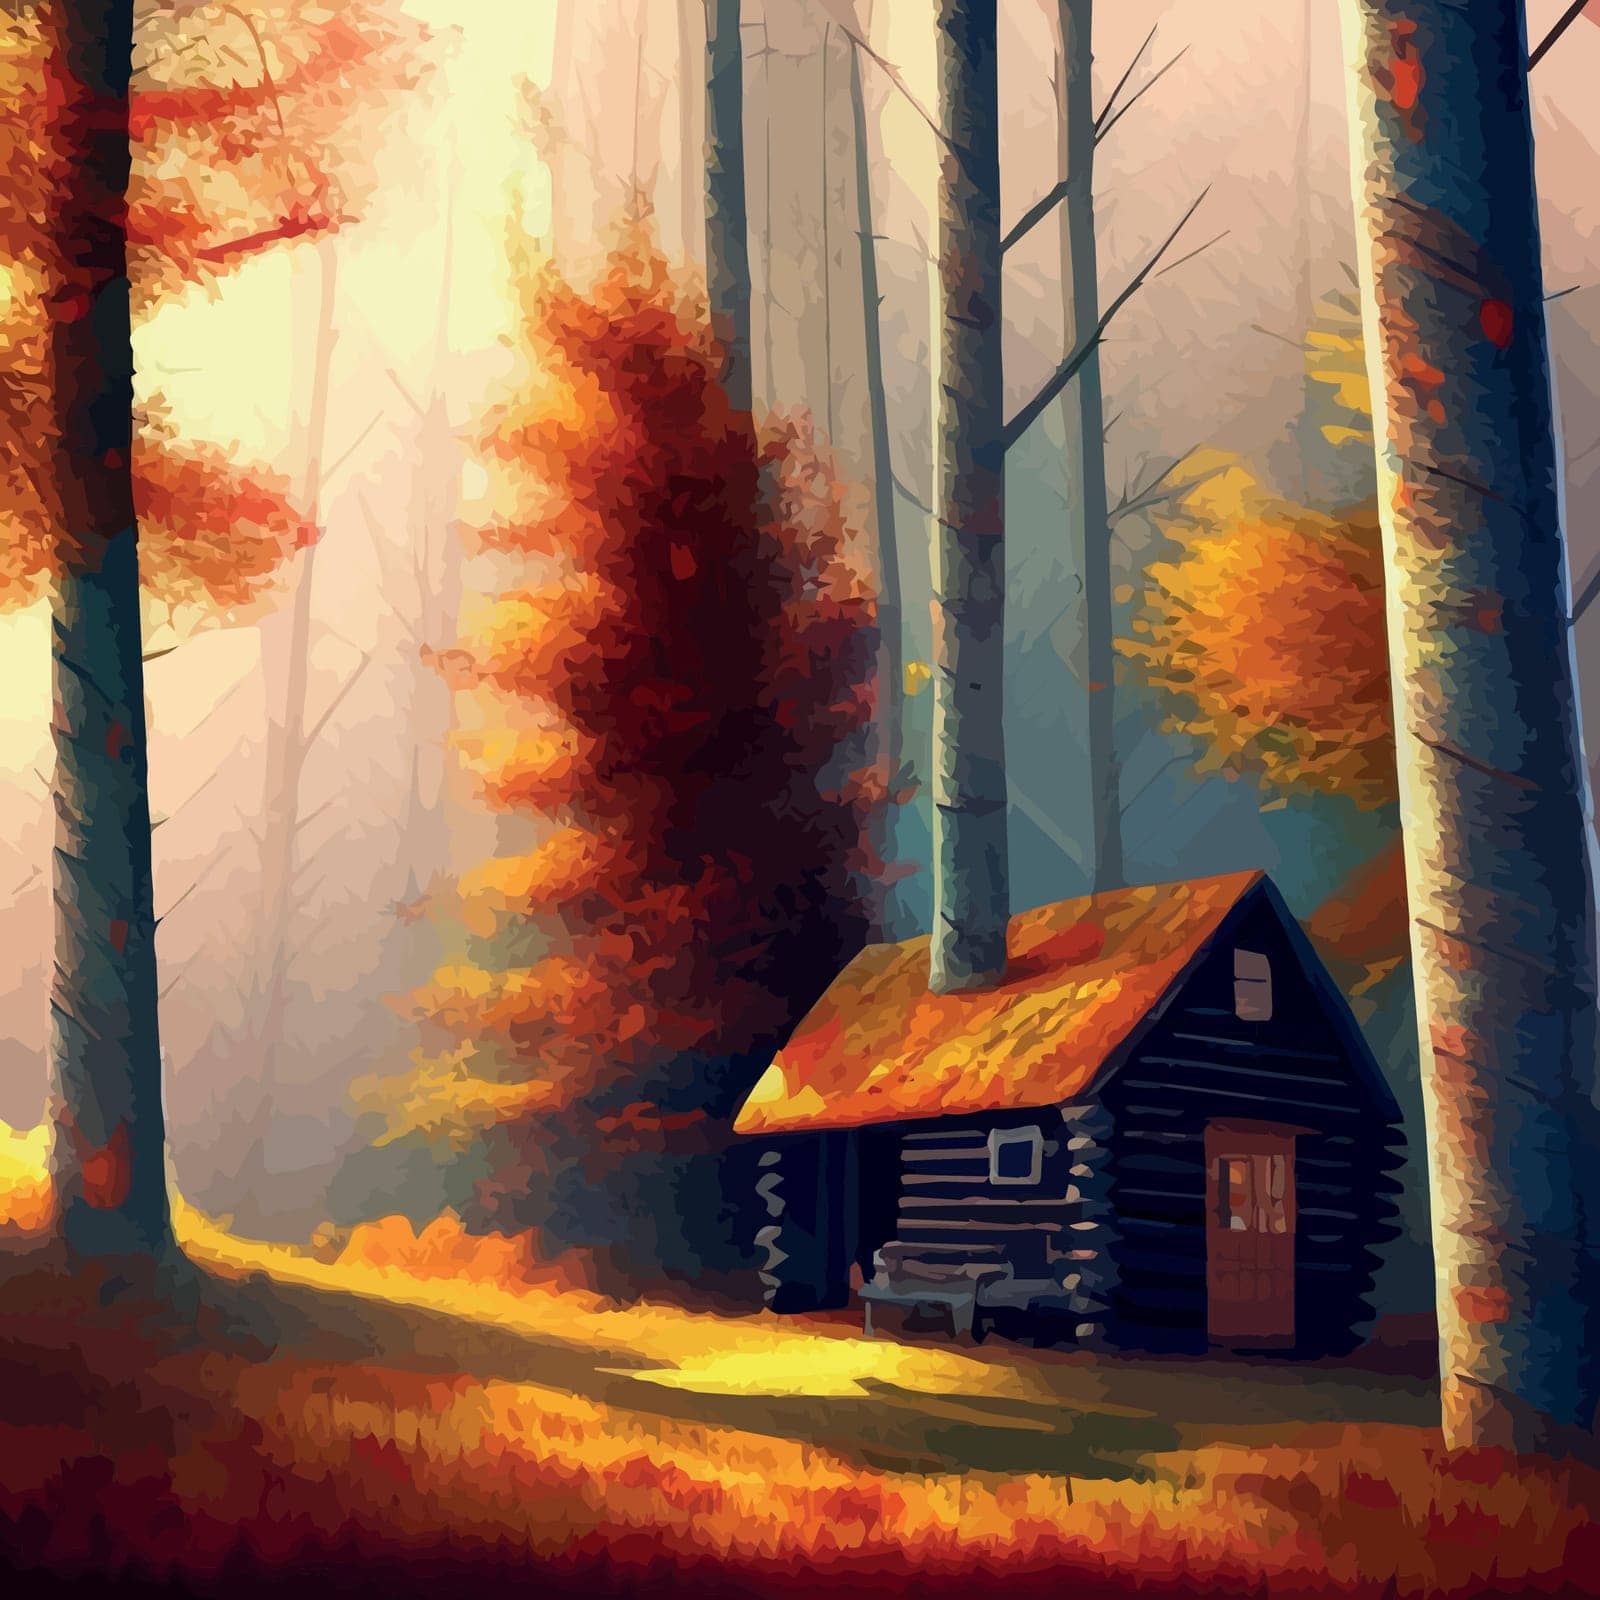 Old wooden hut in autumn forest. In bright orange colors autumn. To protect yourself from hustle and bustle city In a fairy forest where silence and peace Autumn forest landscape. Vector illustration